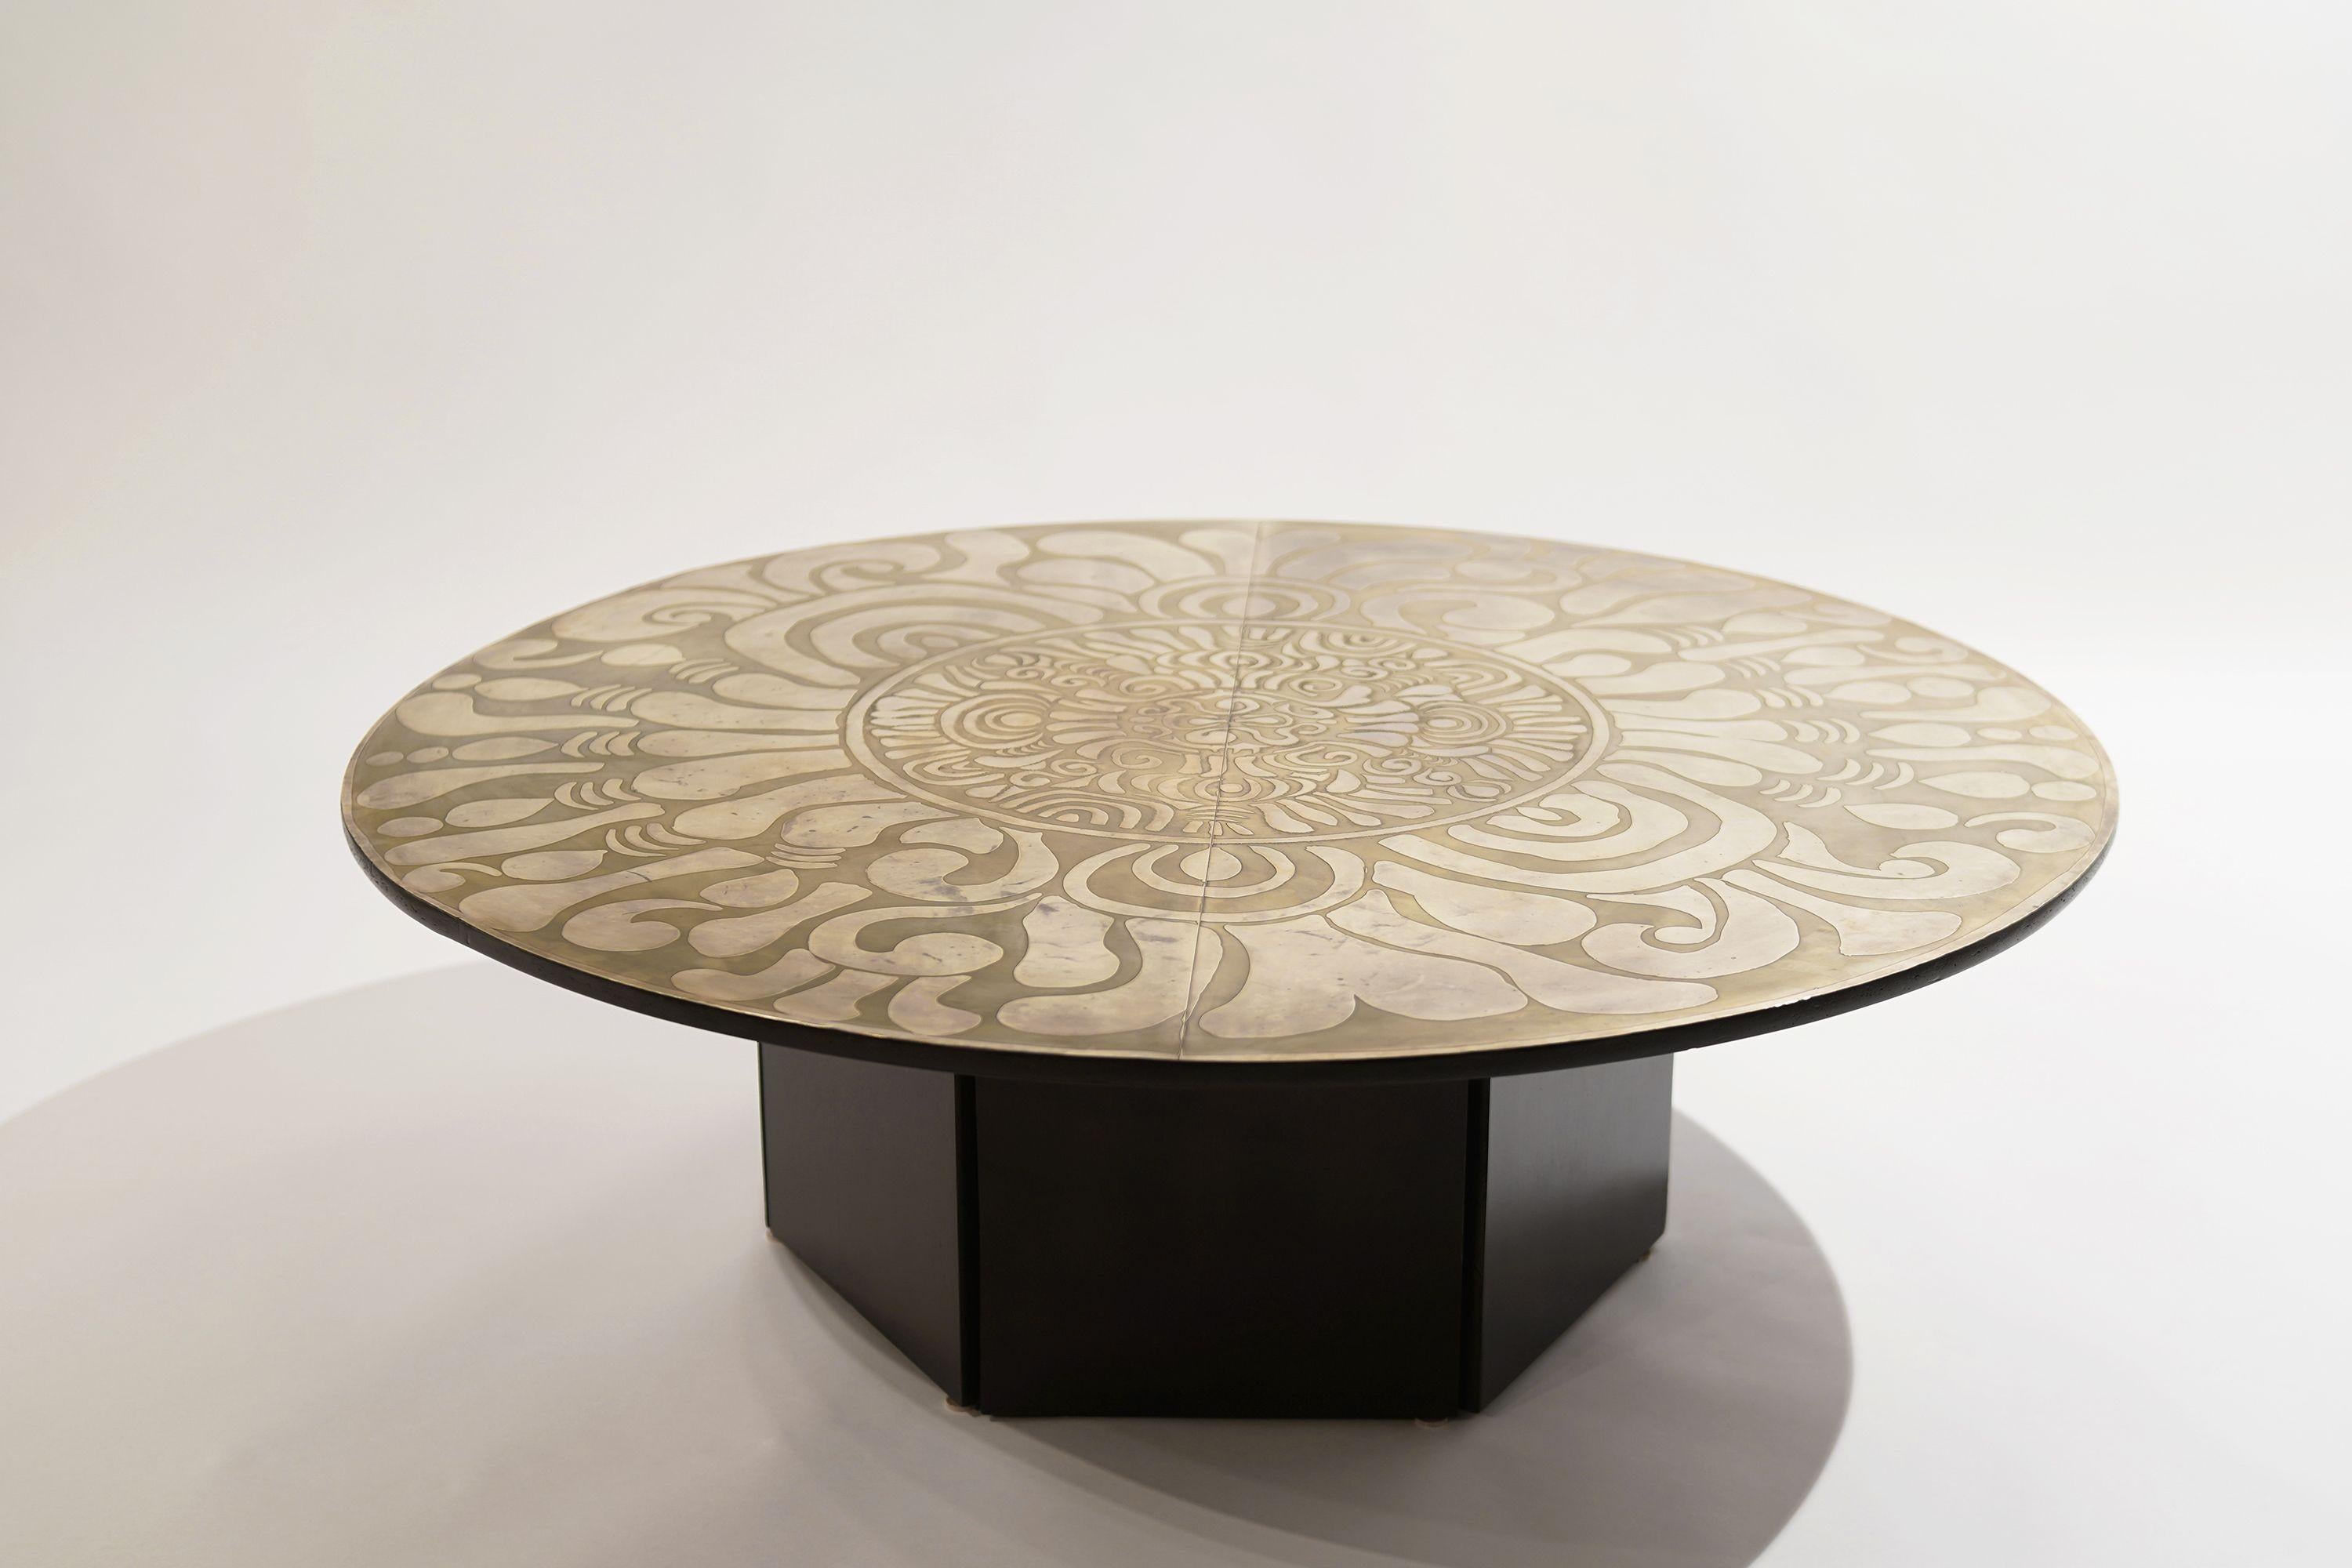 Perhaps one of a kind etched brass coffee table signed Enviane M. Barbara Parker, May 25th, 1965.

The brass top retains a beautiful patina and does show some wear (light scratches). This piece exuberates 